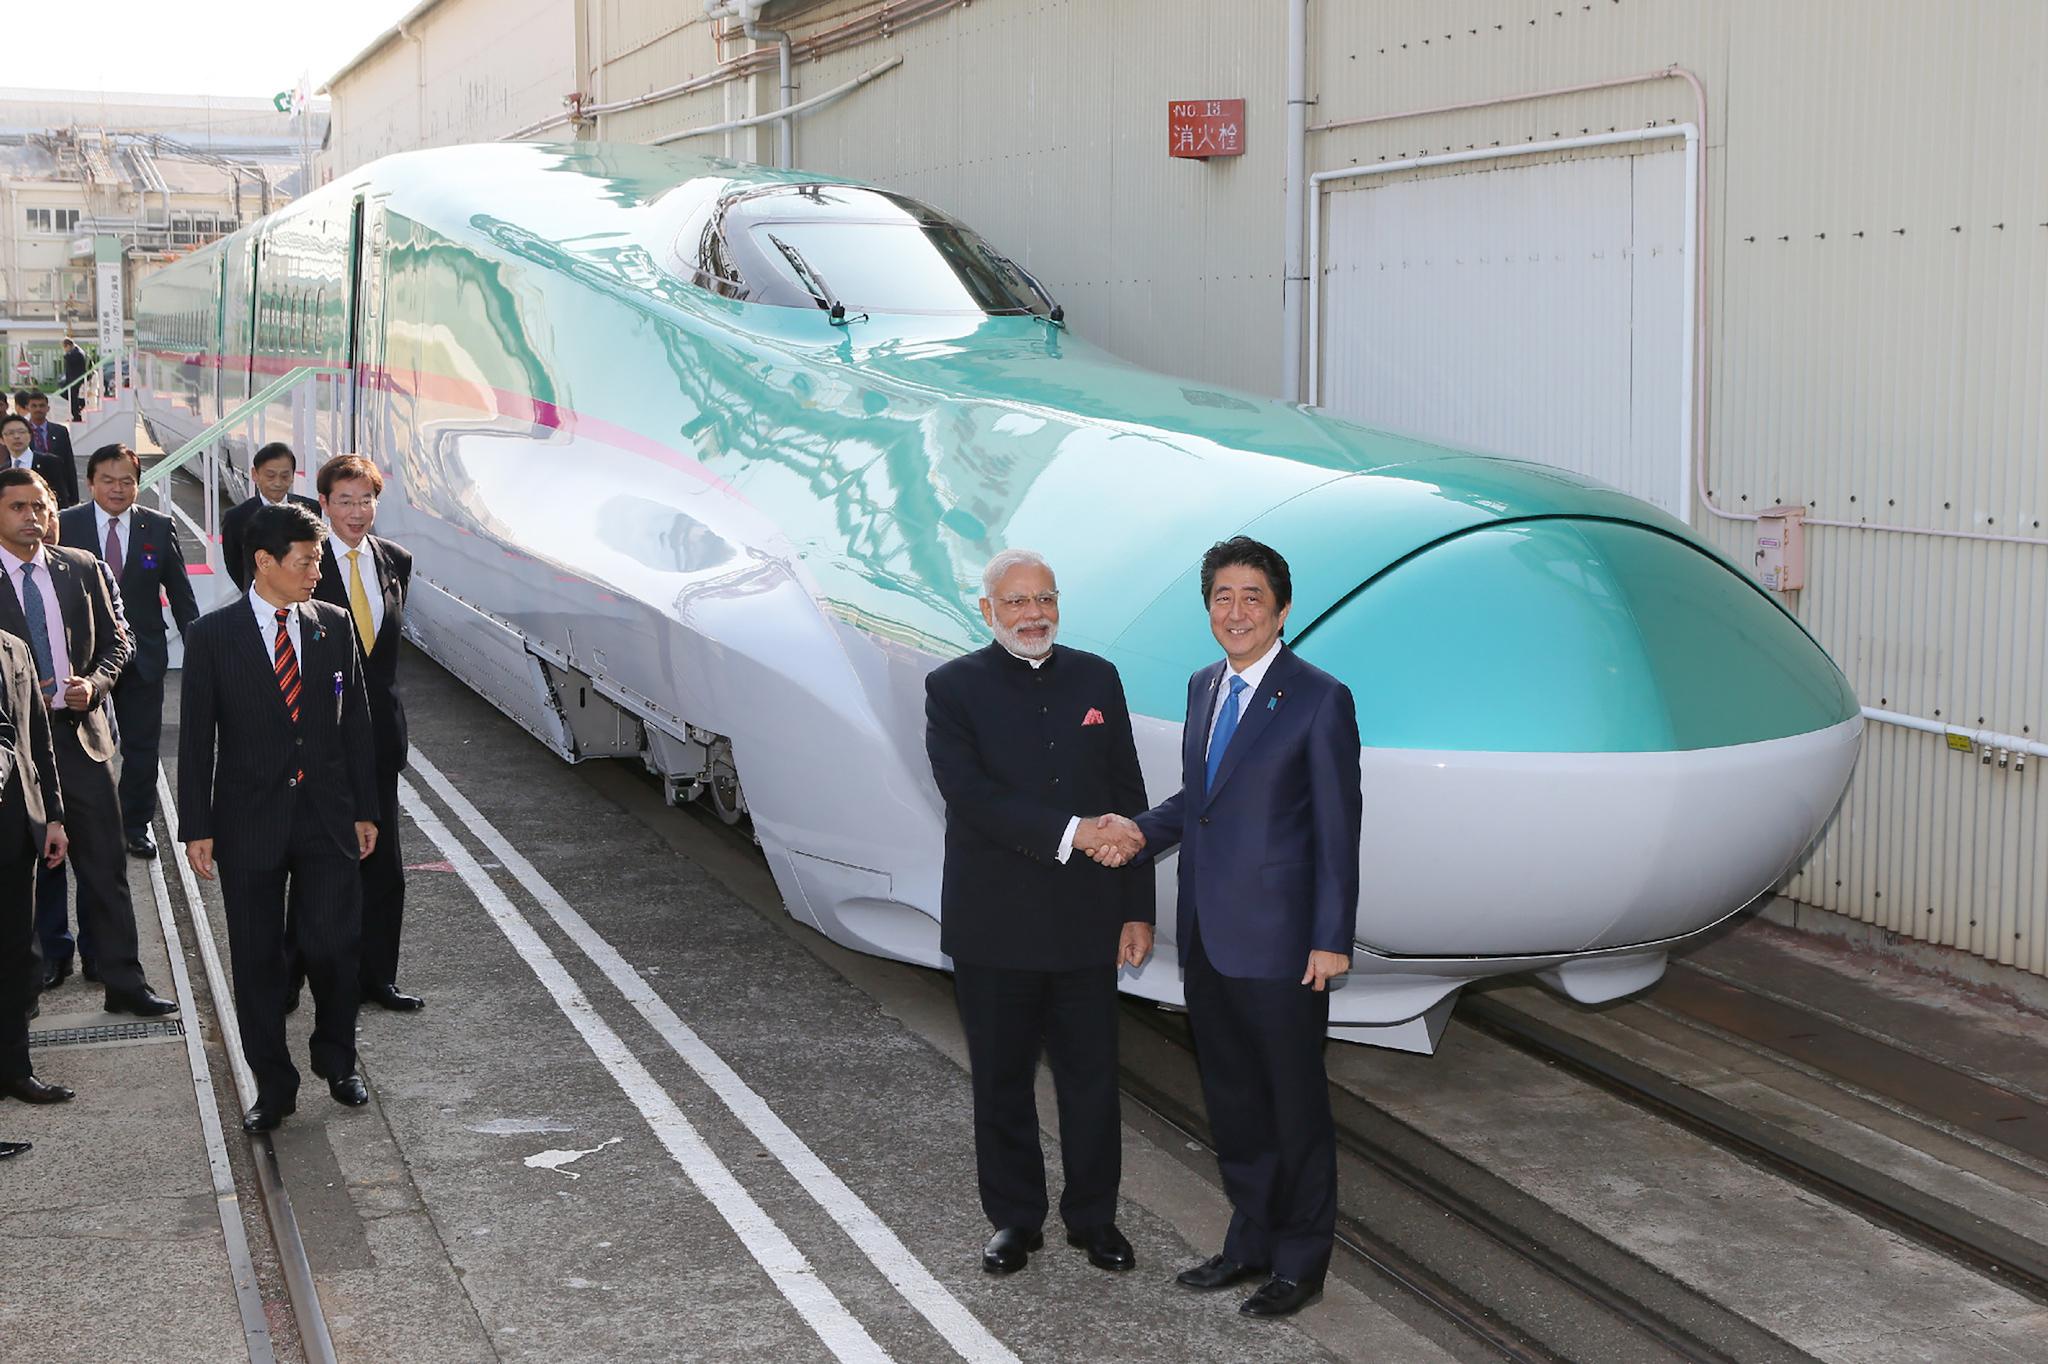 India's Prime Minister Narendra Modi (2nd R) and his Japanese counterpart Shinzo Abe (R) shake hands in front of a shinkansen train during their inspection at a bullet train manufacturing plant in Kobe, Hyogo prefecture on November 12, 2016